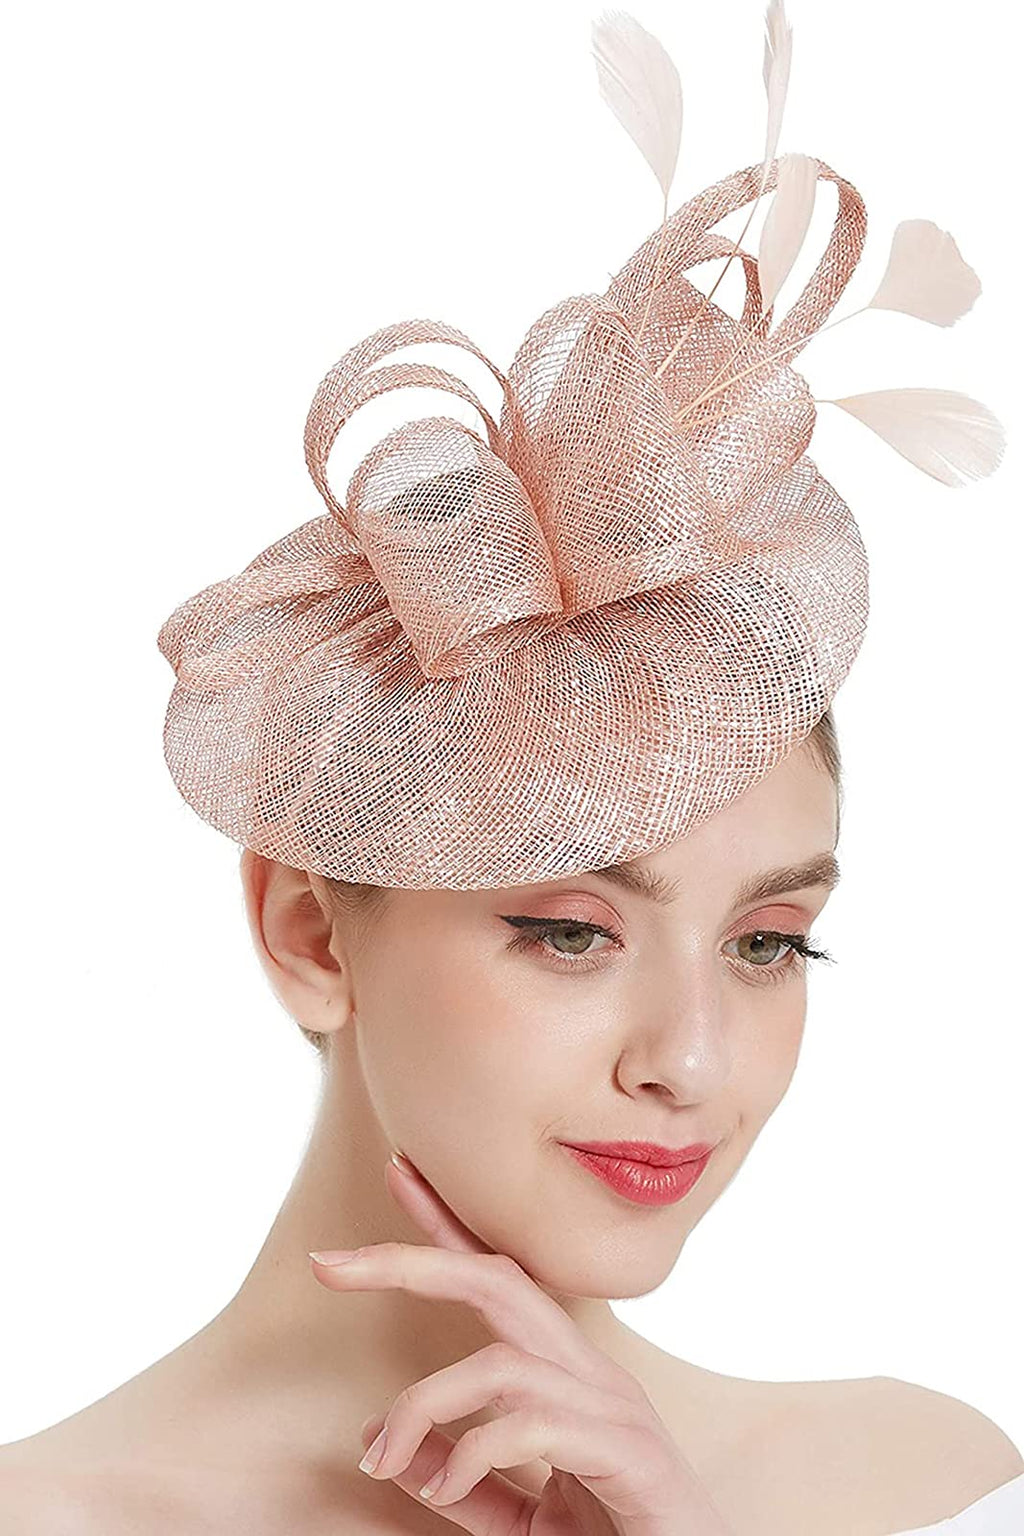 [Australia] - Z&X Sinamay Fascinator Pillbox Hat with Headband Hair Clip for Cocktail Tea Party 035 Nude Pink 